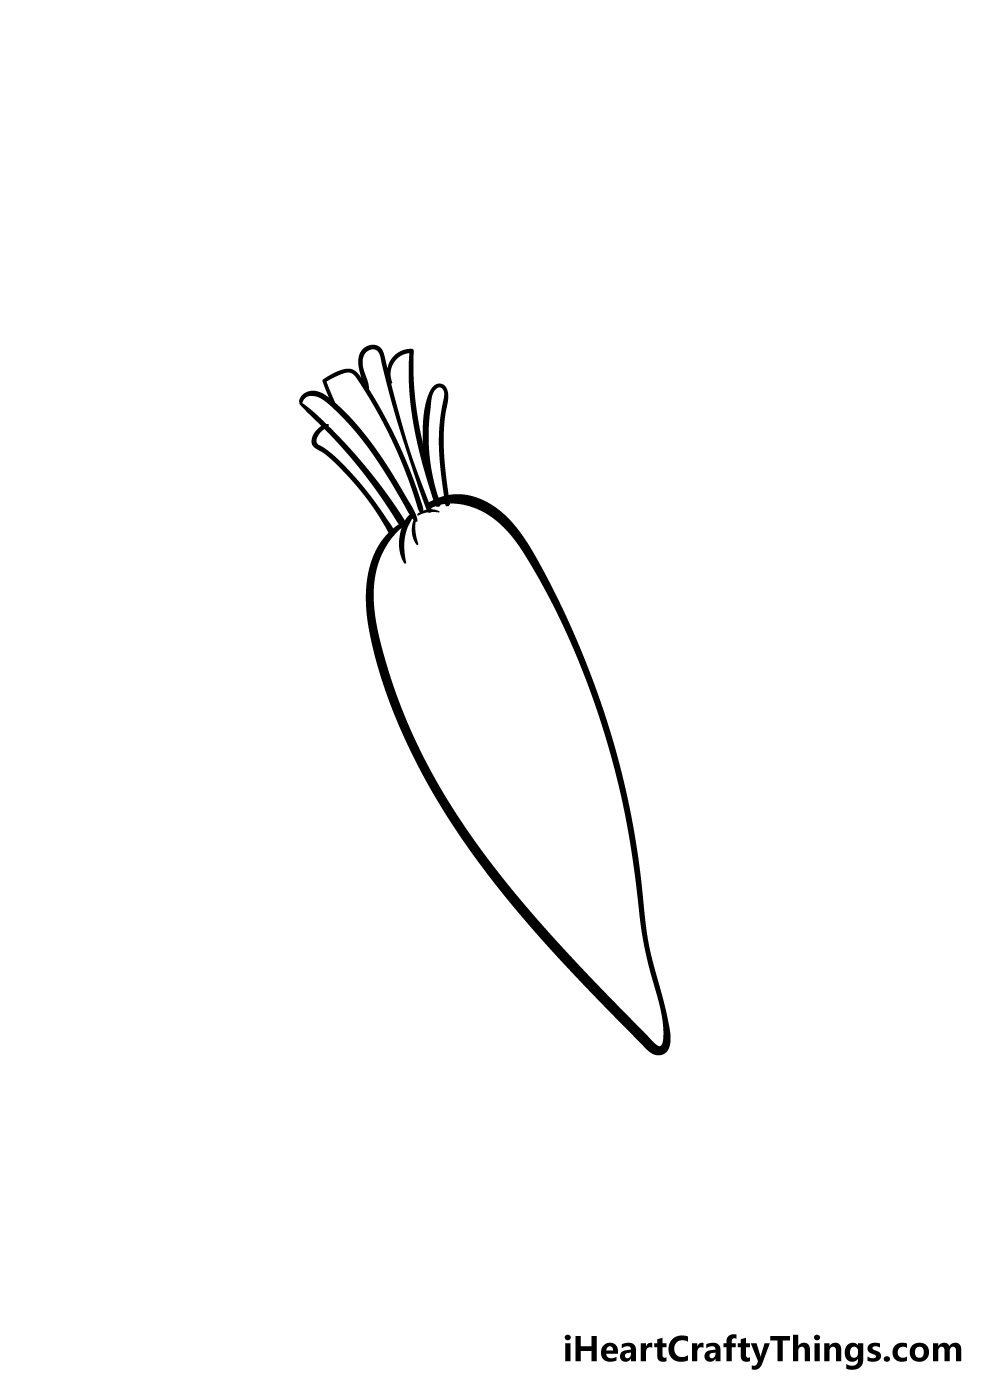 carrot drawing step 5